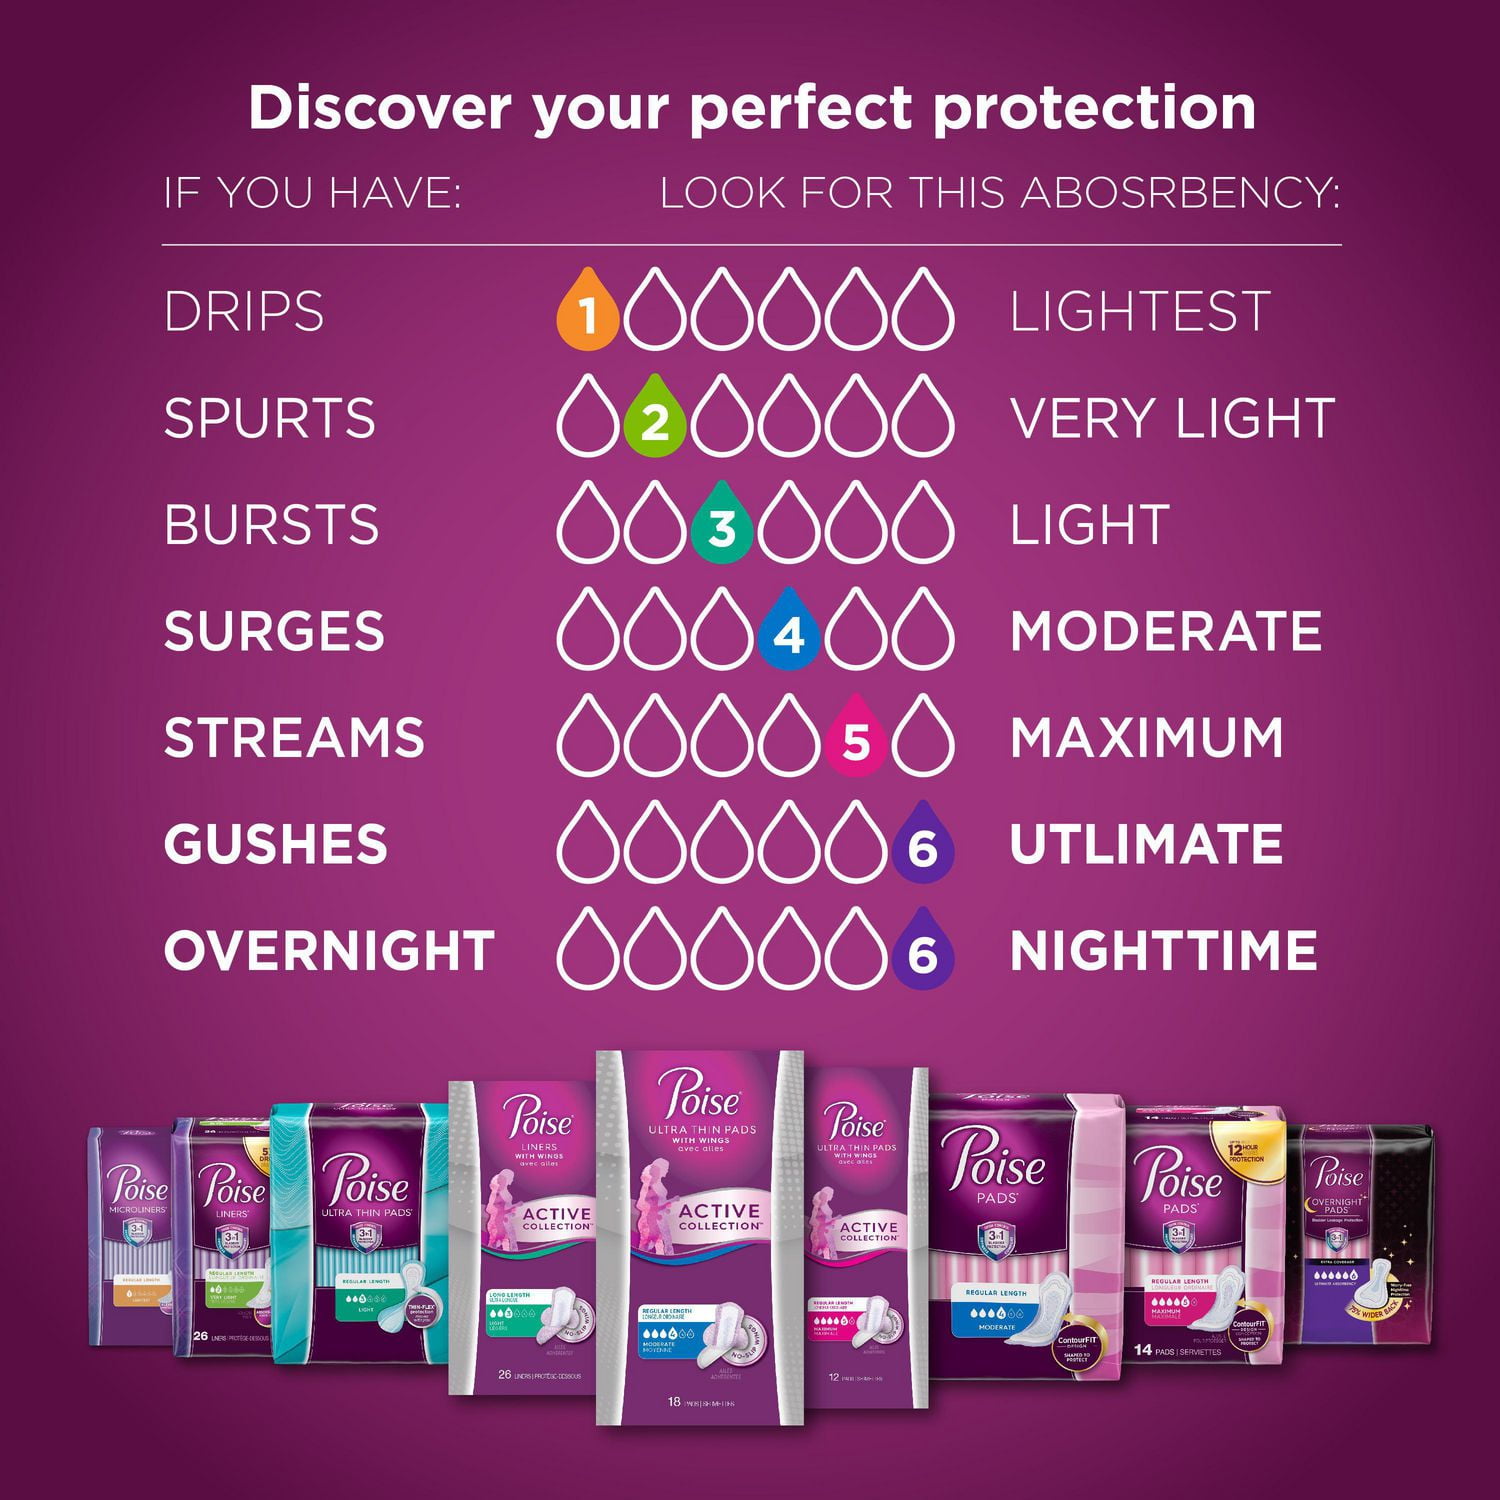 Incontinence Daily Liners, Lightest Absorbency